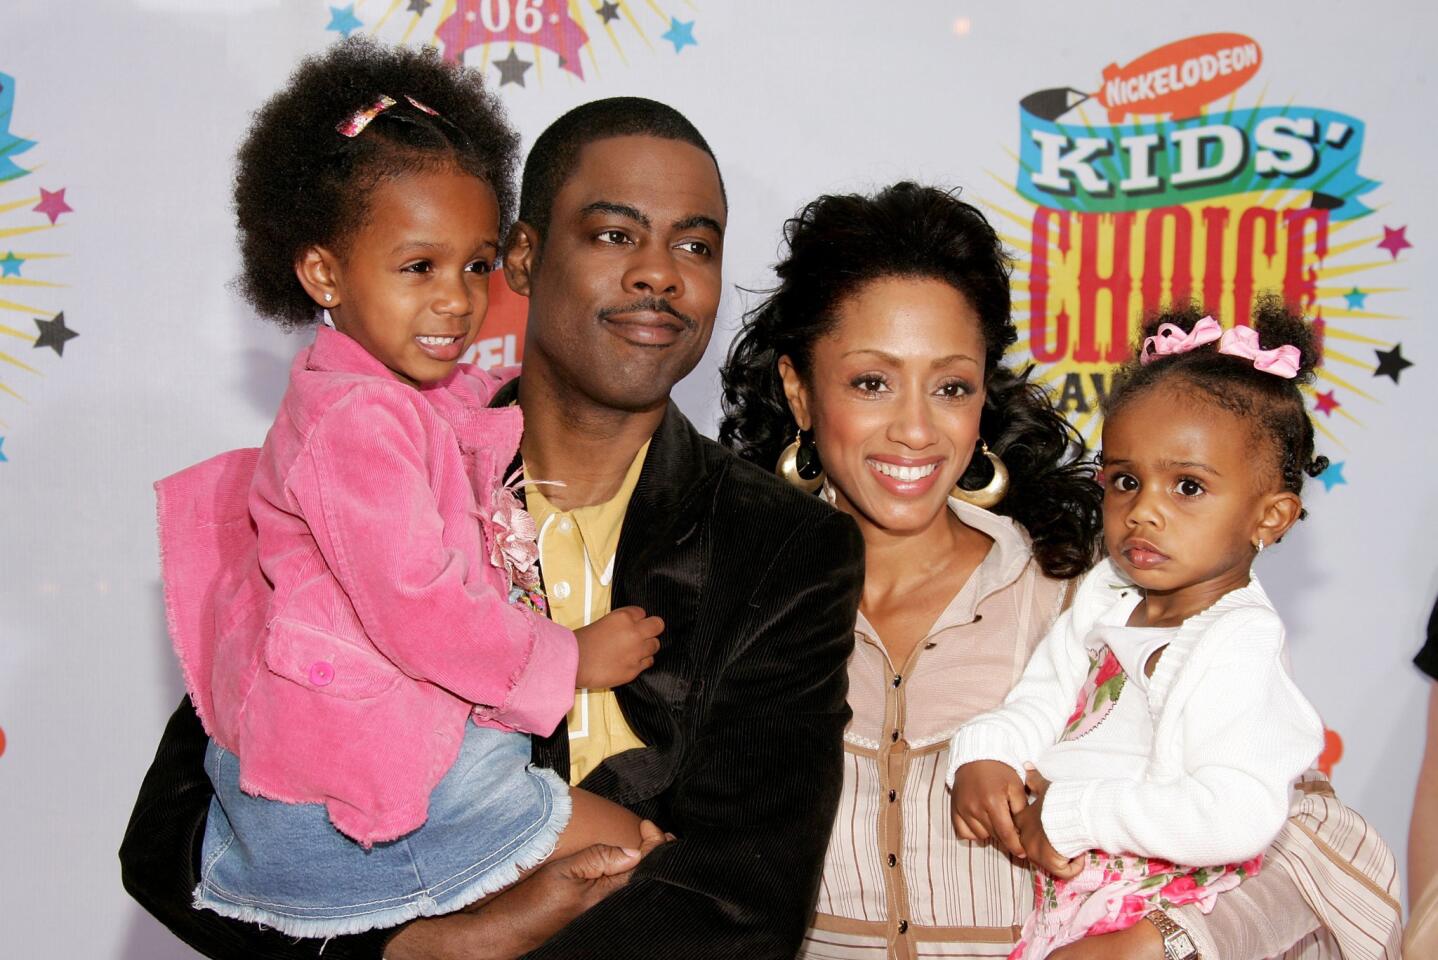 The comedian's wife first announced their split in late December with Rock's camp saying that he had already filed for divorce after nearly 20 years of marriage. The couple wed in 1996 and have two daughters together: Lola Simone, 12, and Zahra Savannah, 10.